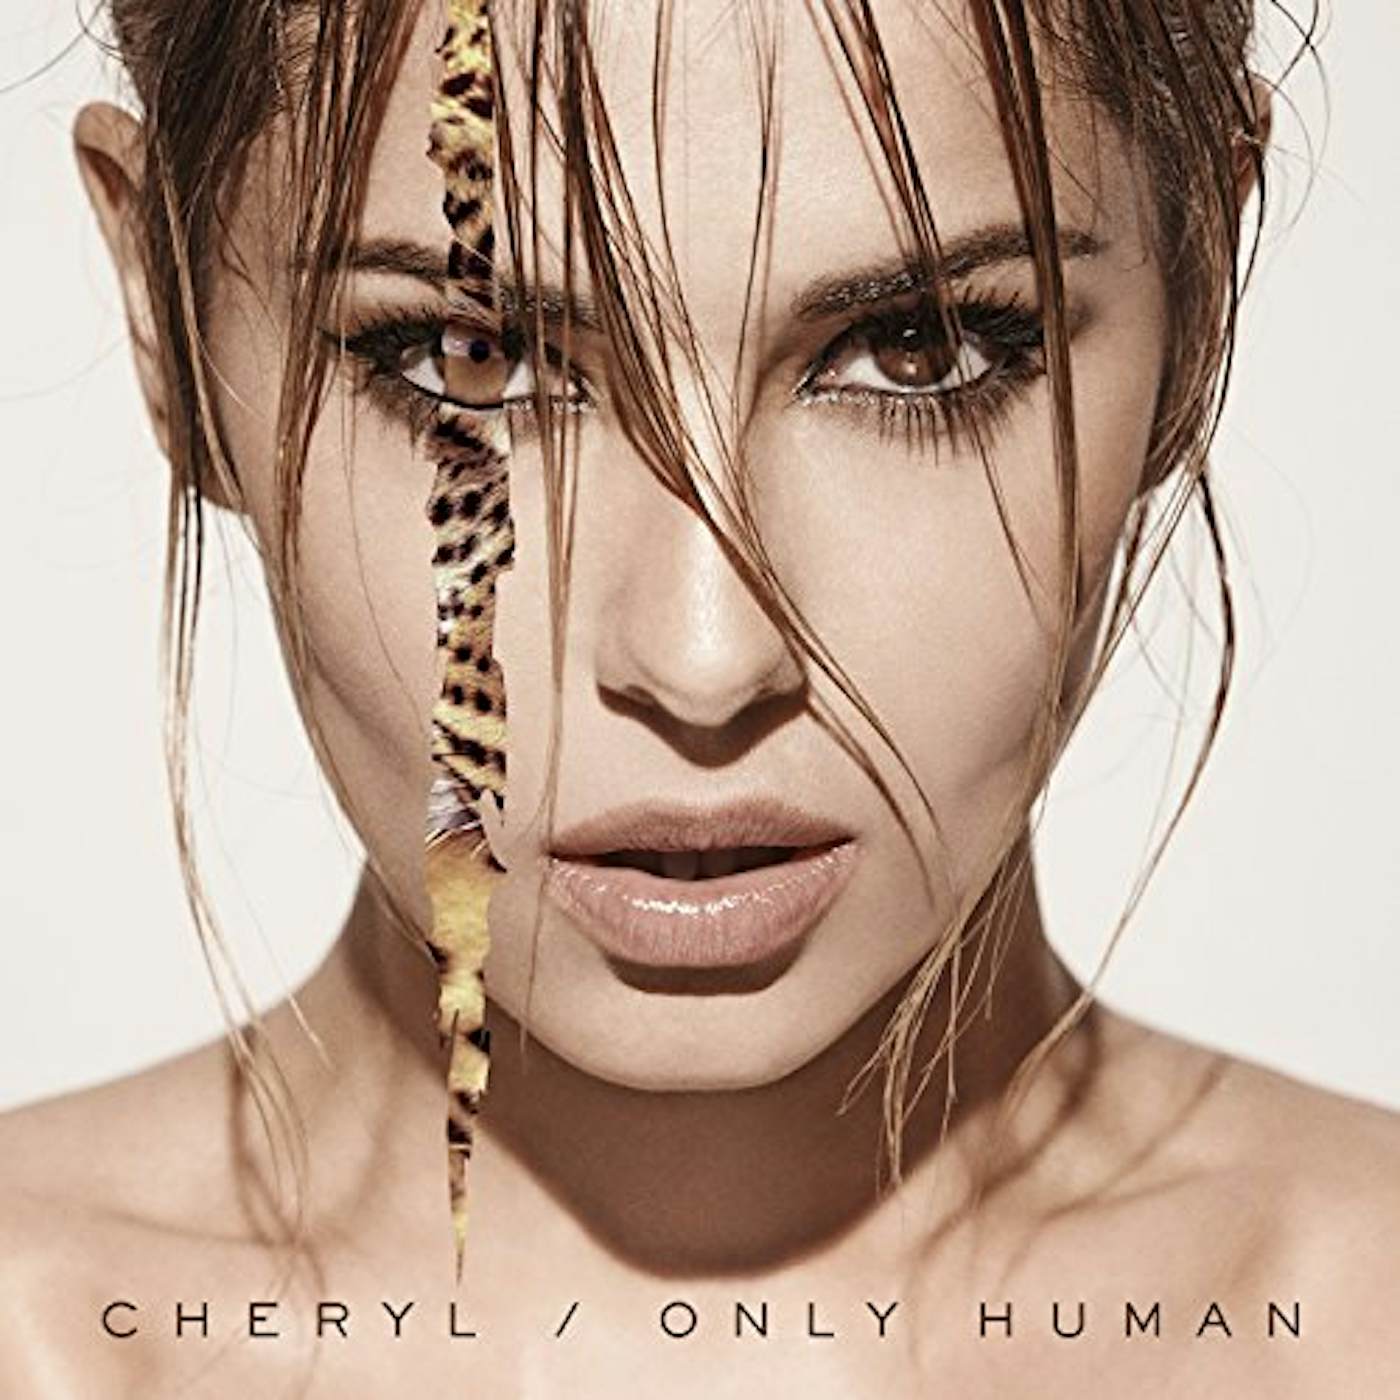 Cheryl ONLY HUMAN: DELUXE EDITION CD